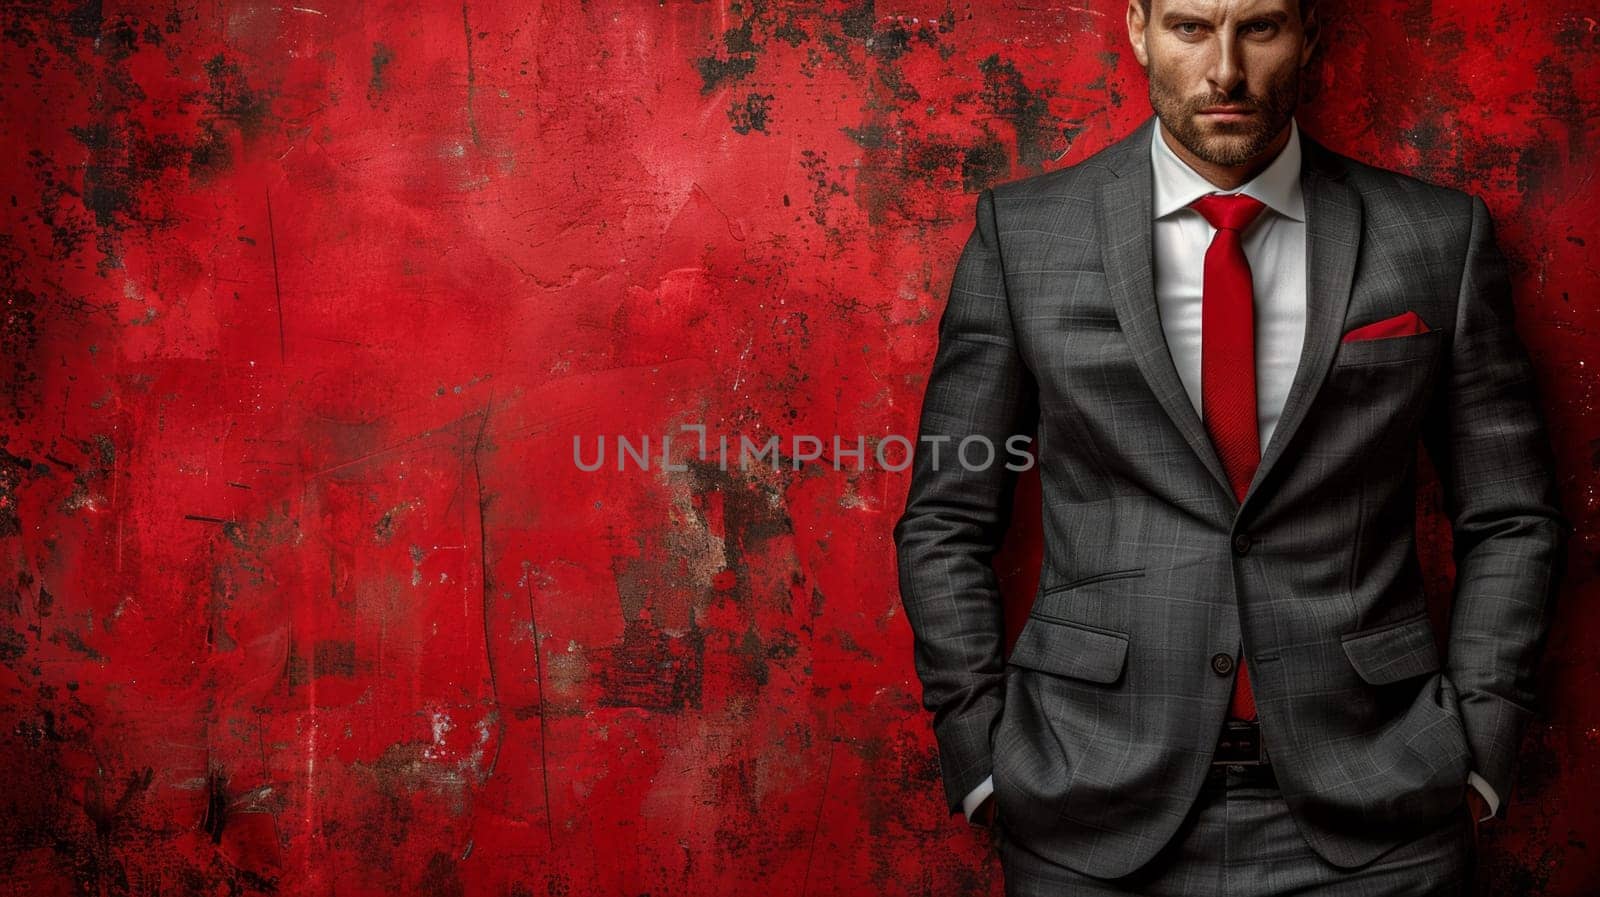 A man in a suit and tie standing against red wall, AI by starush